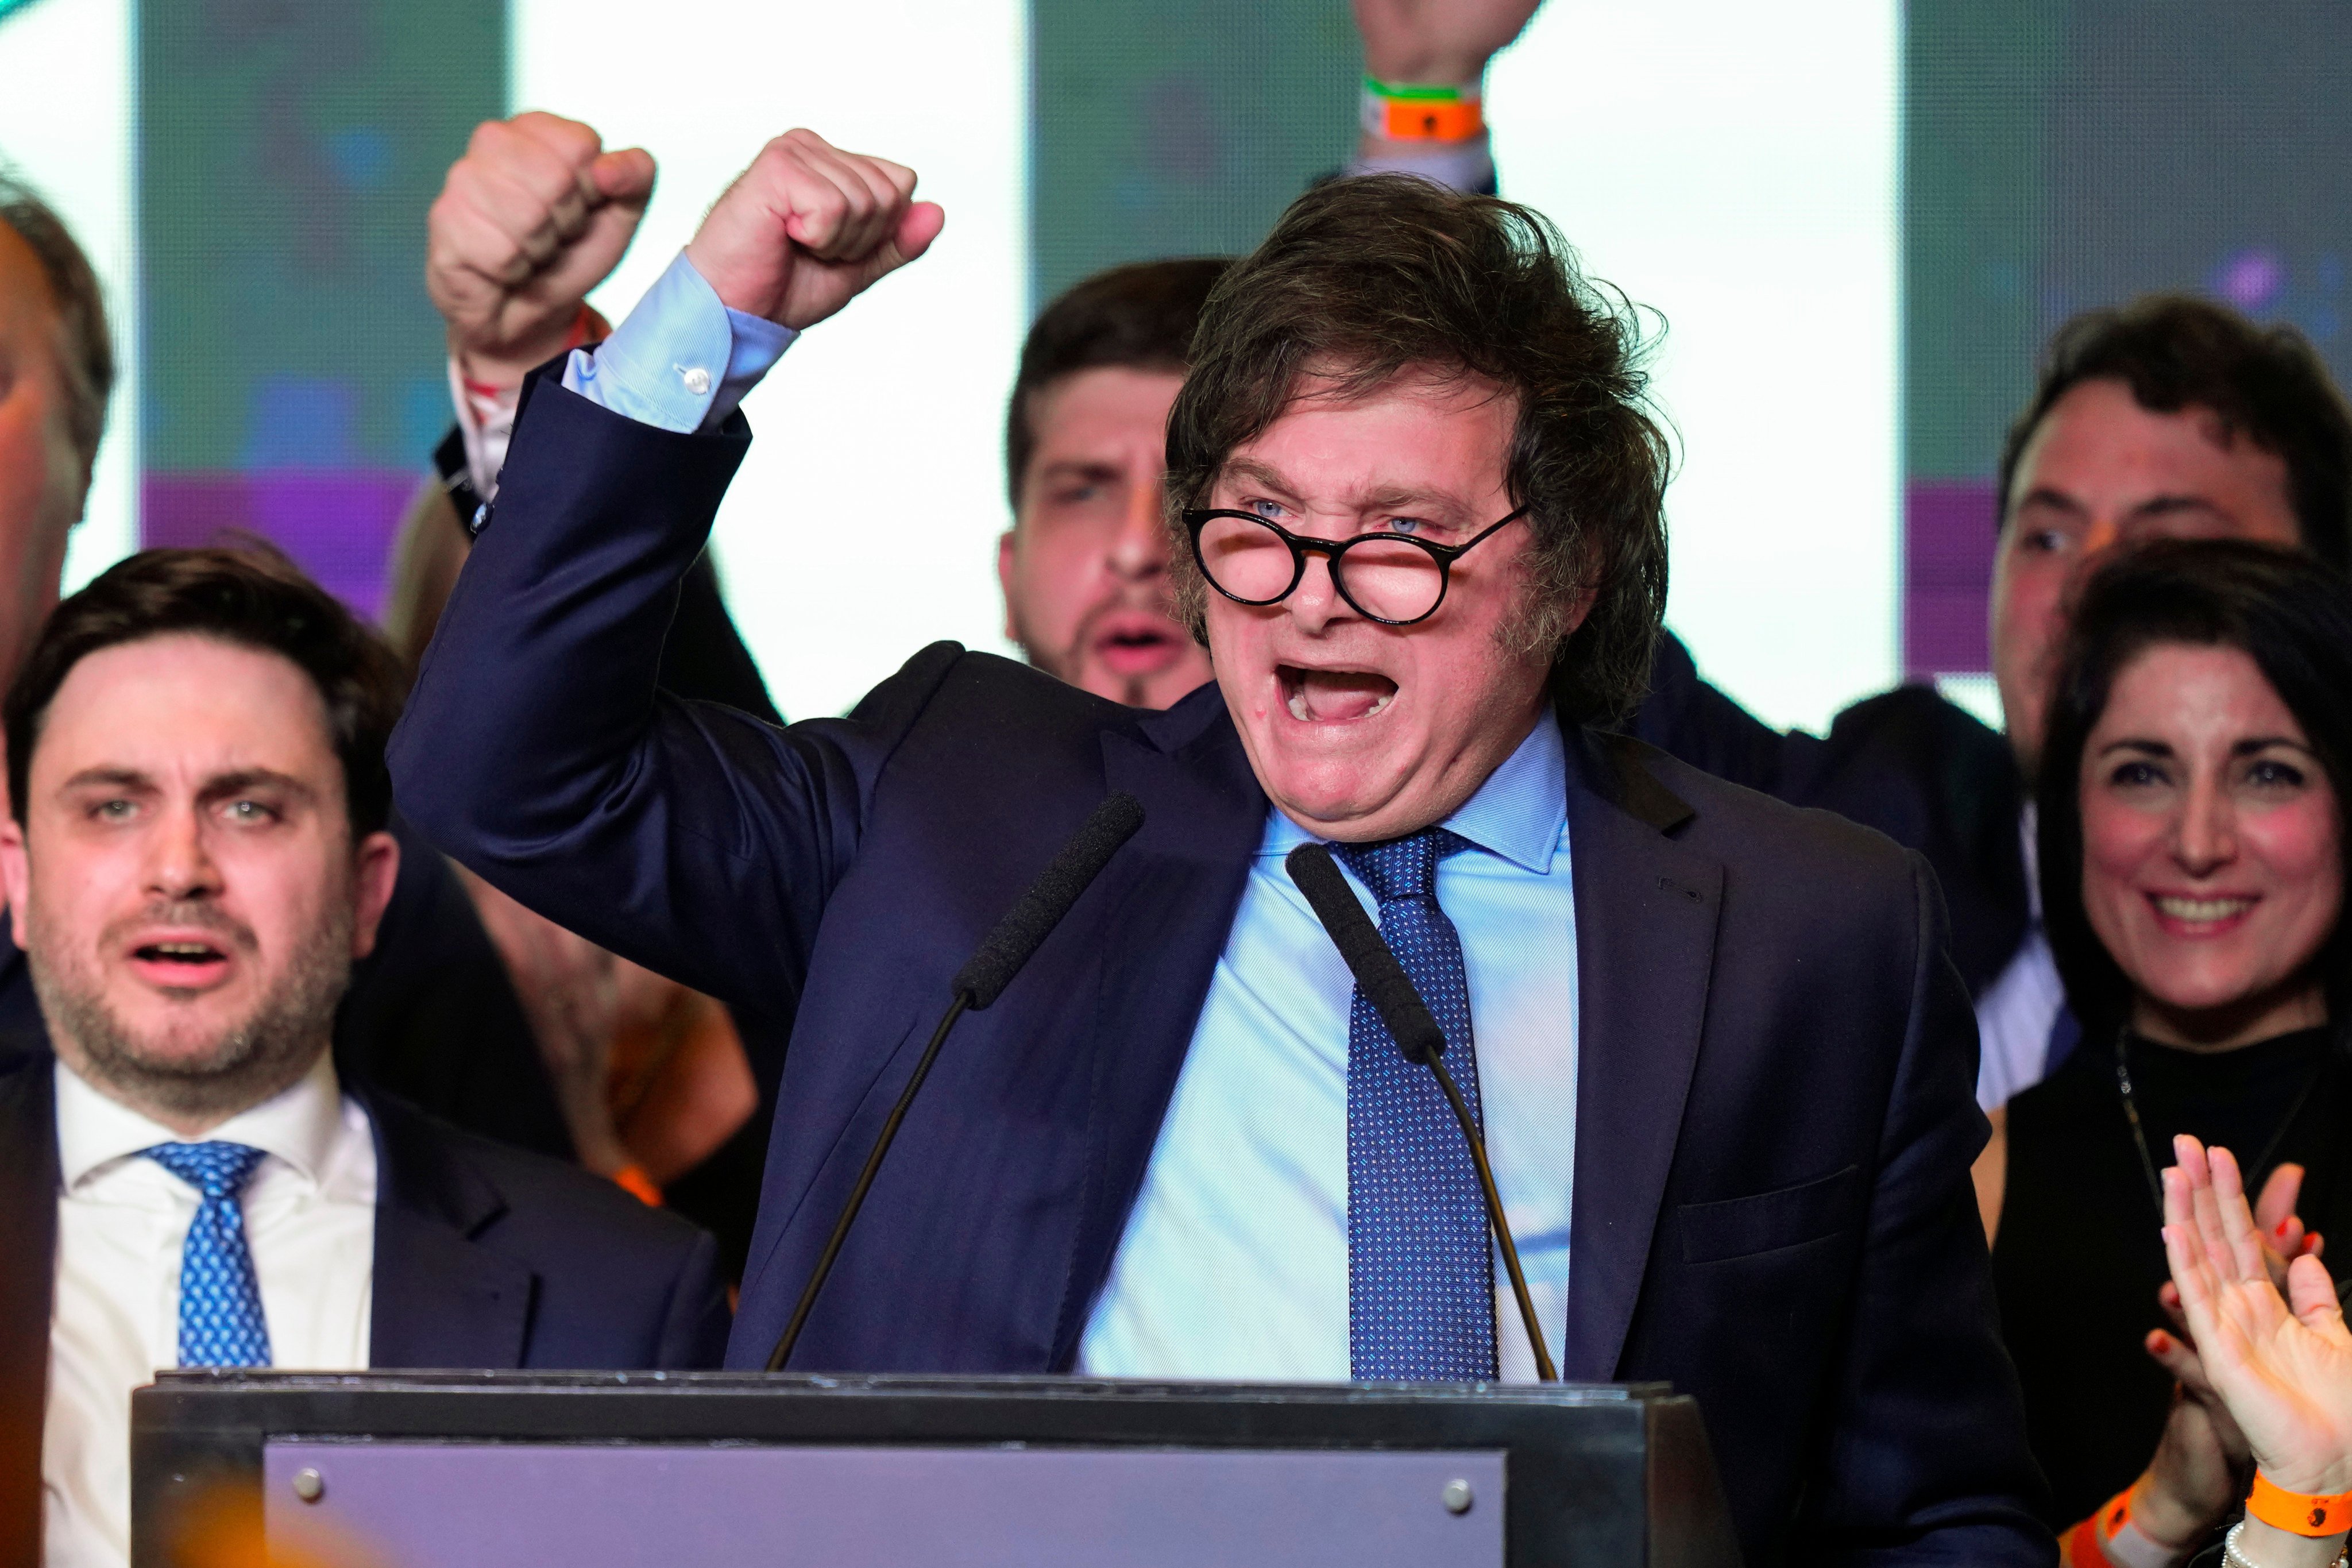 Javier Milei, presidential candidate of the Liberty Advances coalition, has said he would “not do business with communist countries”. Photo: AP